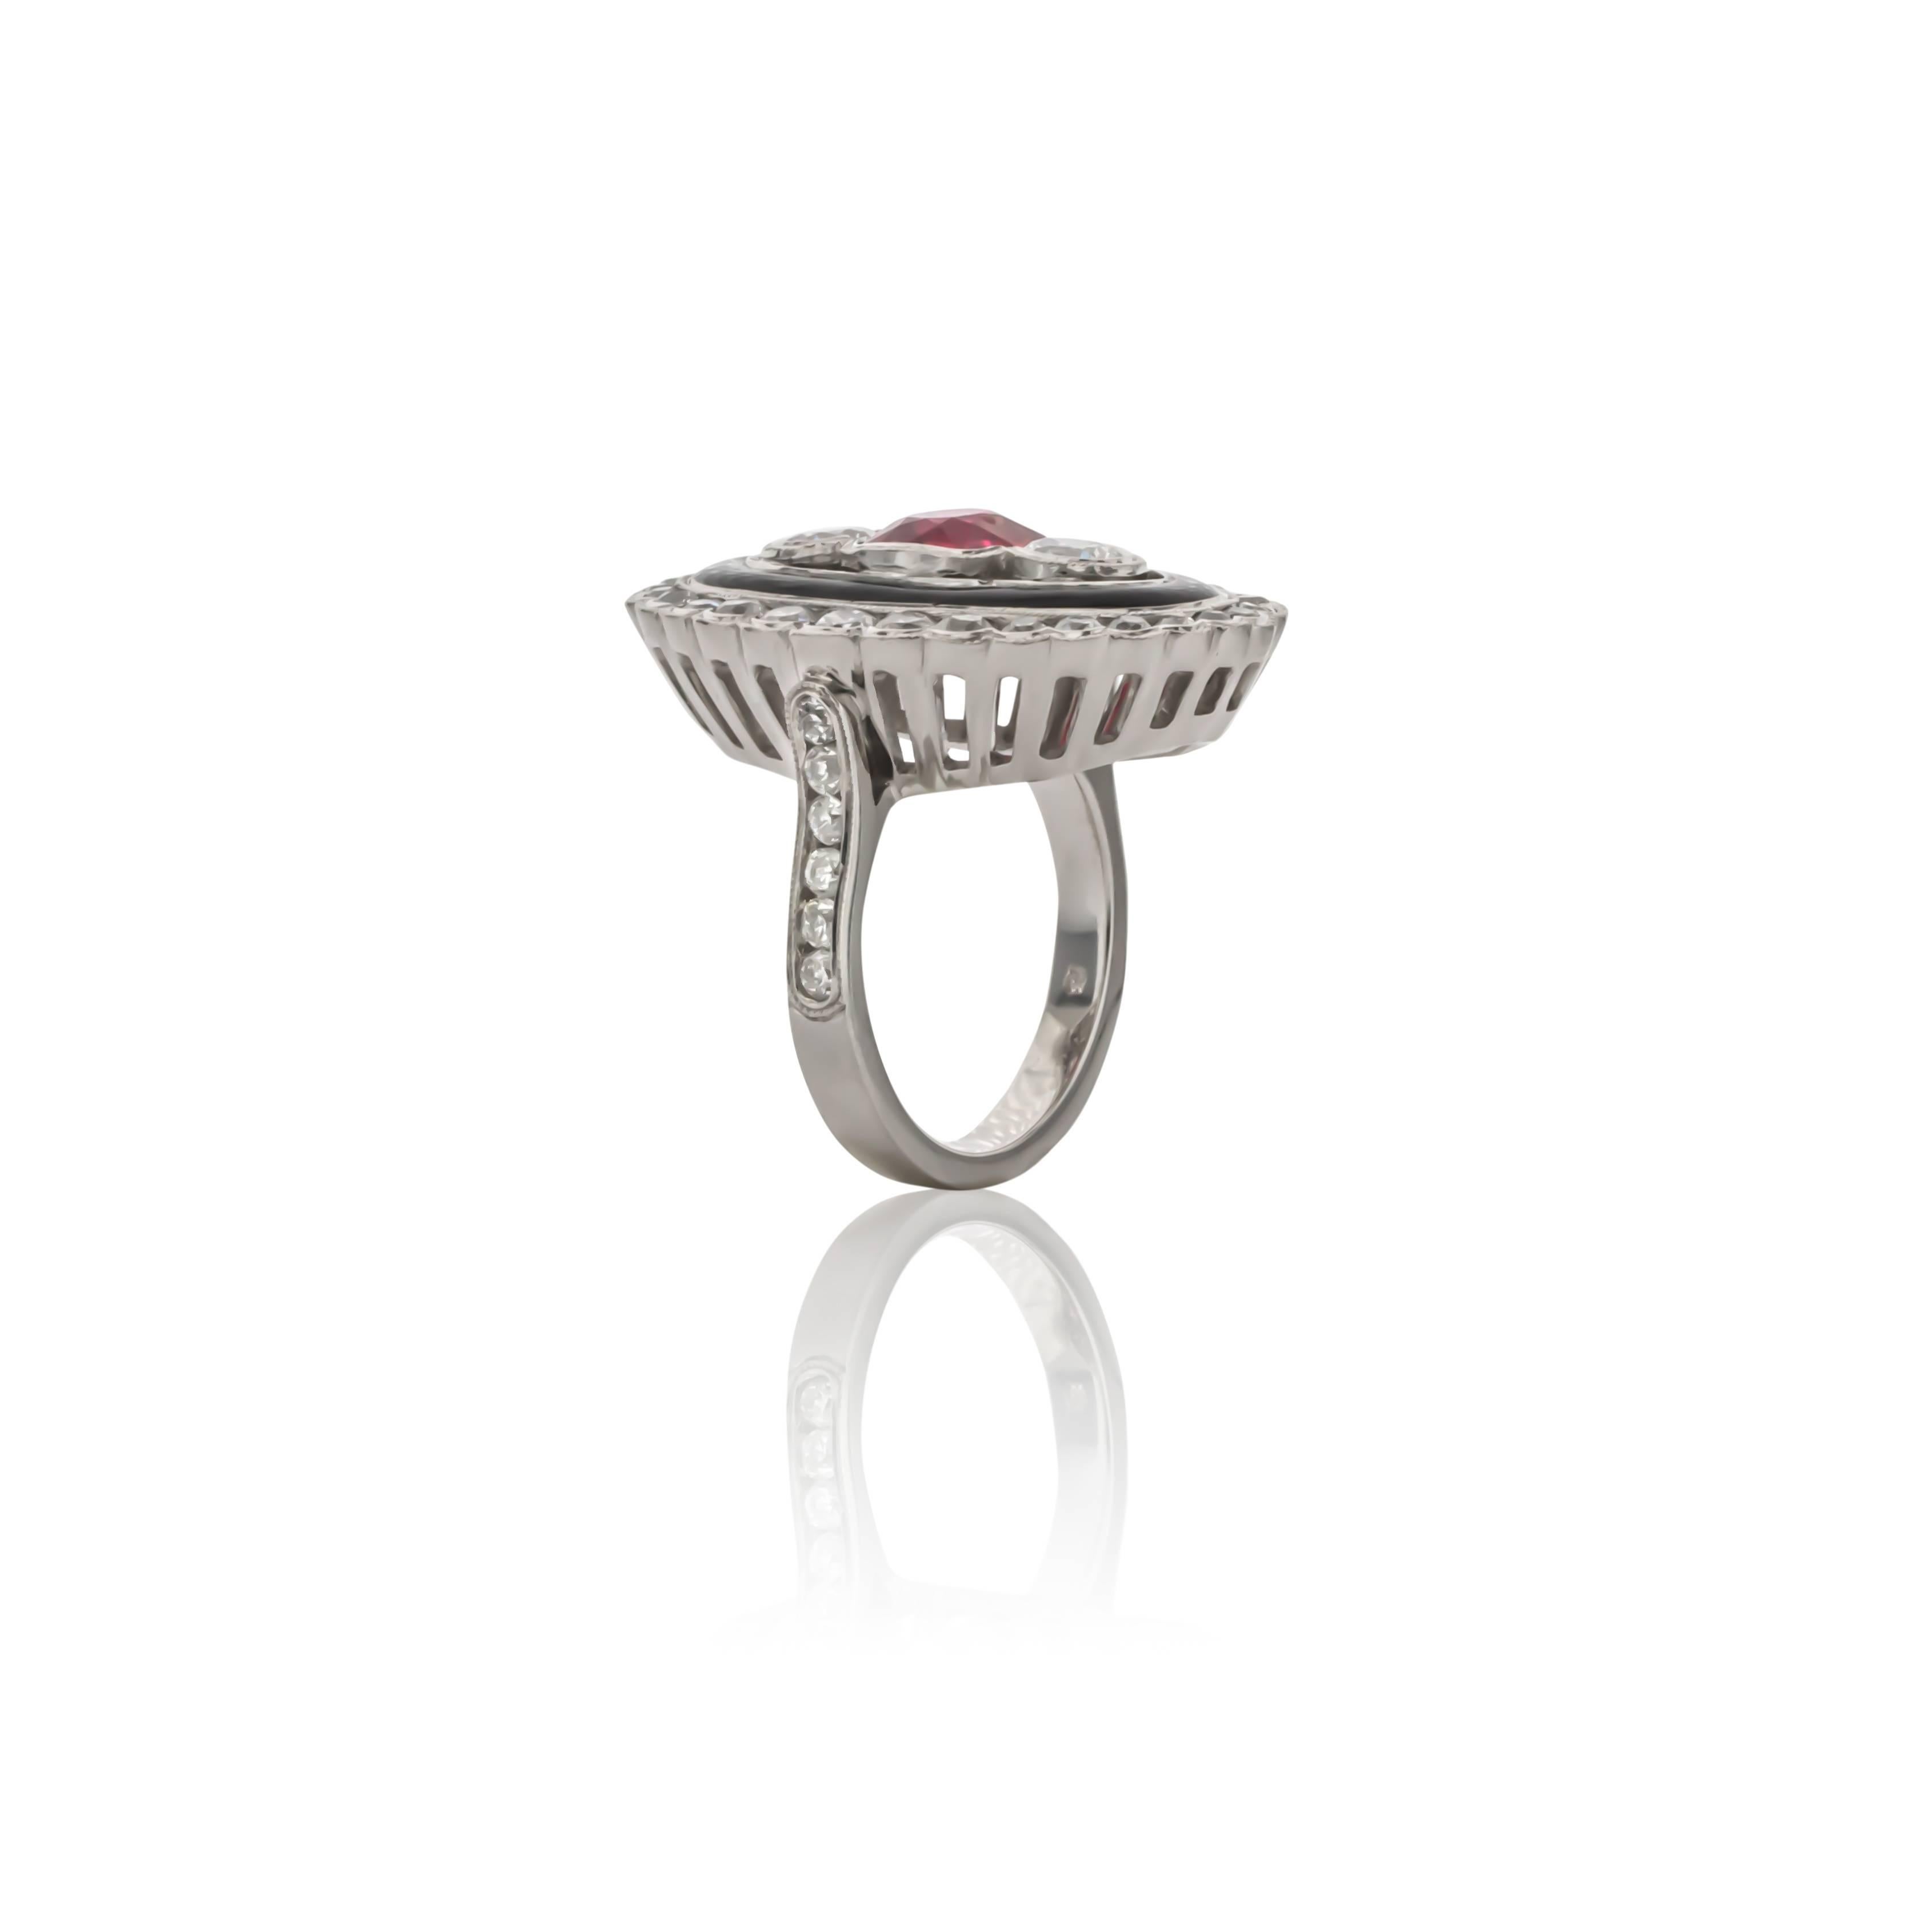 One of a kind platinum red spinel, diamond, and black enamel cocktail ring. Bezel set with one cushion cut red spinel weighing 1.77 carats of fine color and round brilliant cut diamonds weighing 2.57 carats total weight, G color and VS clarity. 